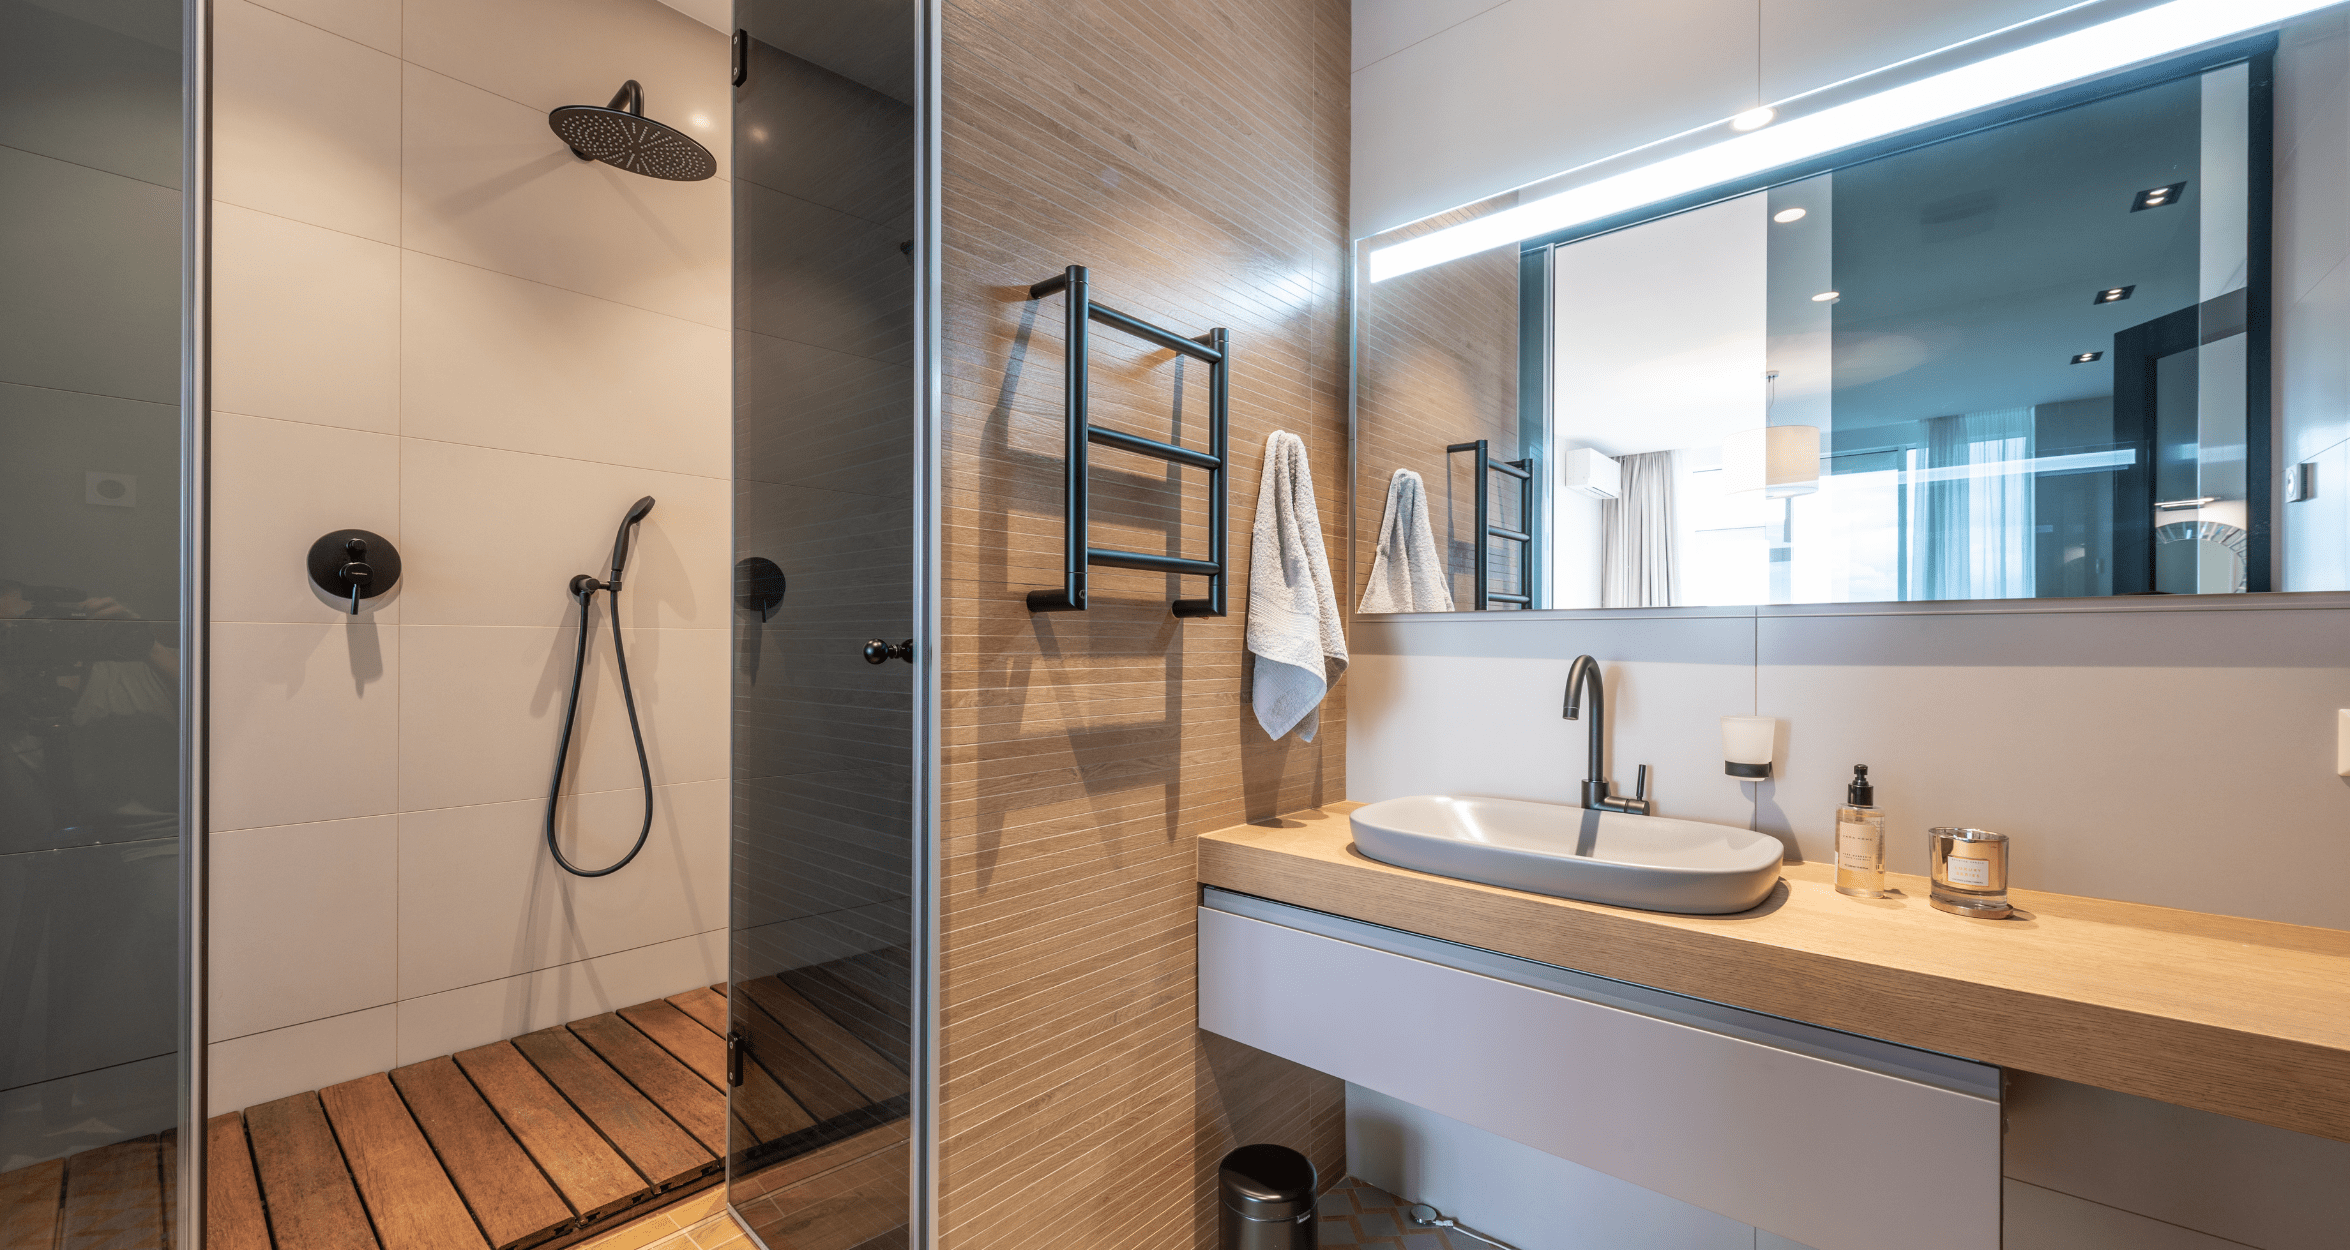 Modern bathroom with wood countertops and walls, with a spacious walk-in shower.